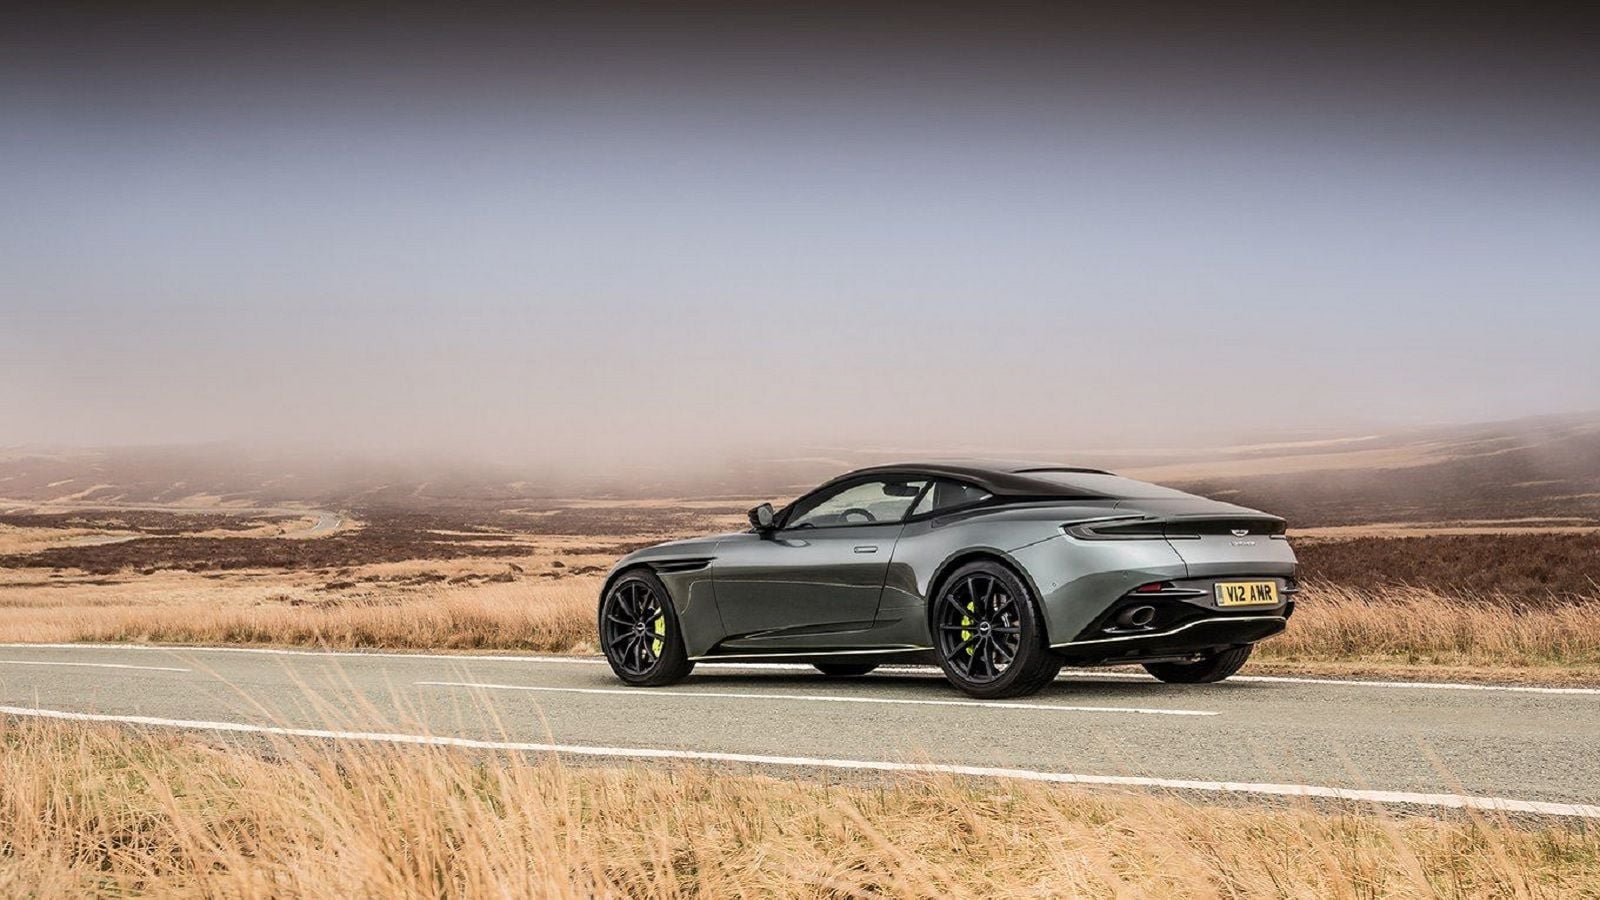 2019 AMR DB11 Hits the Road with 630HP | 6speedonline